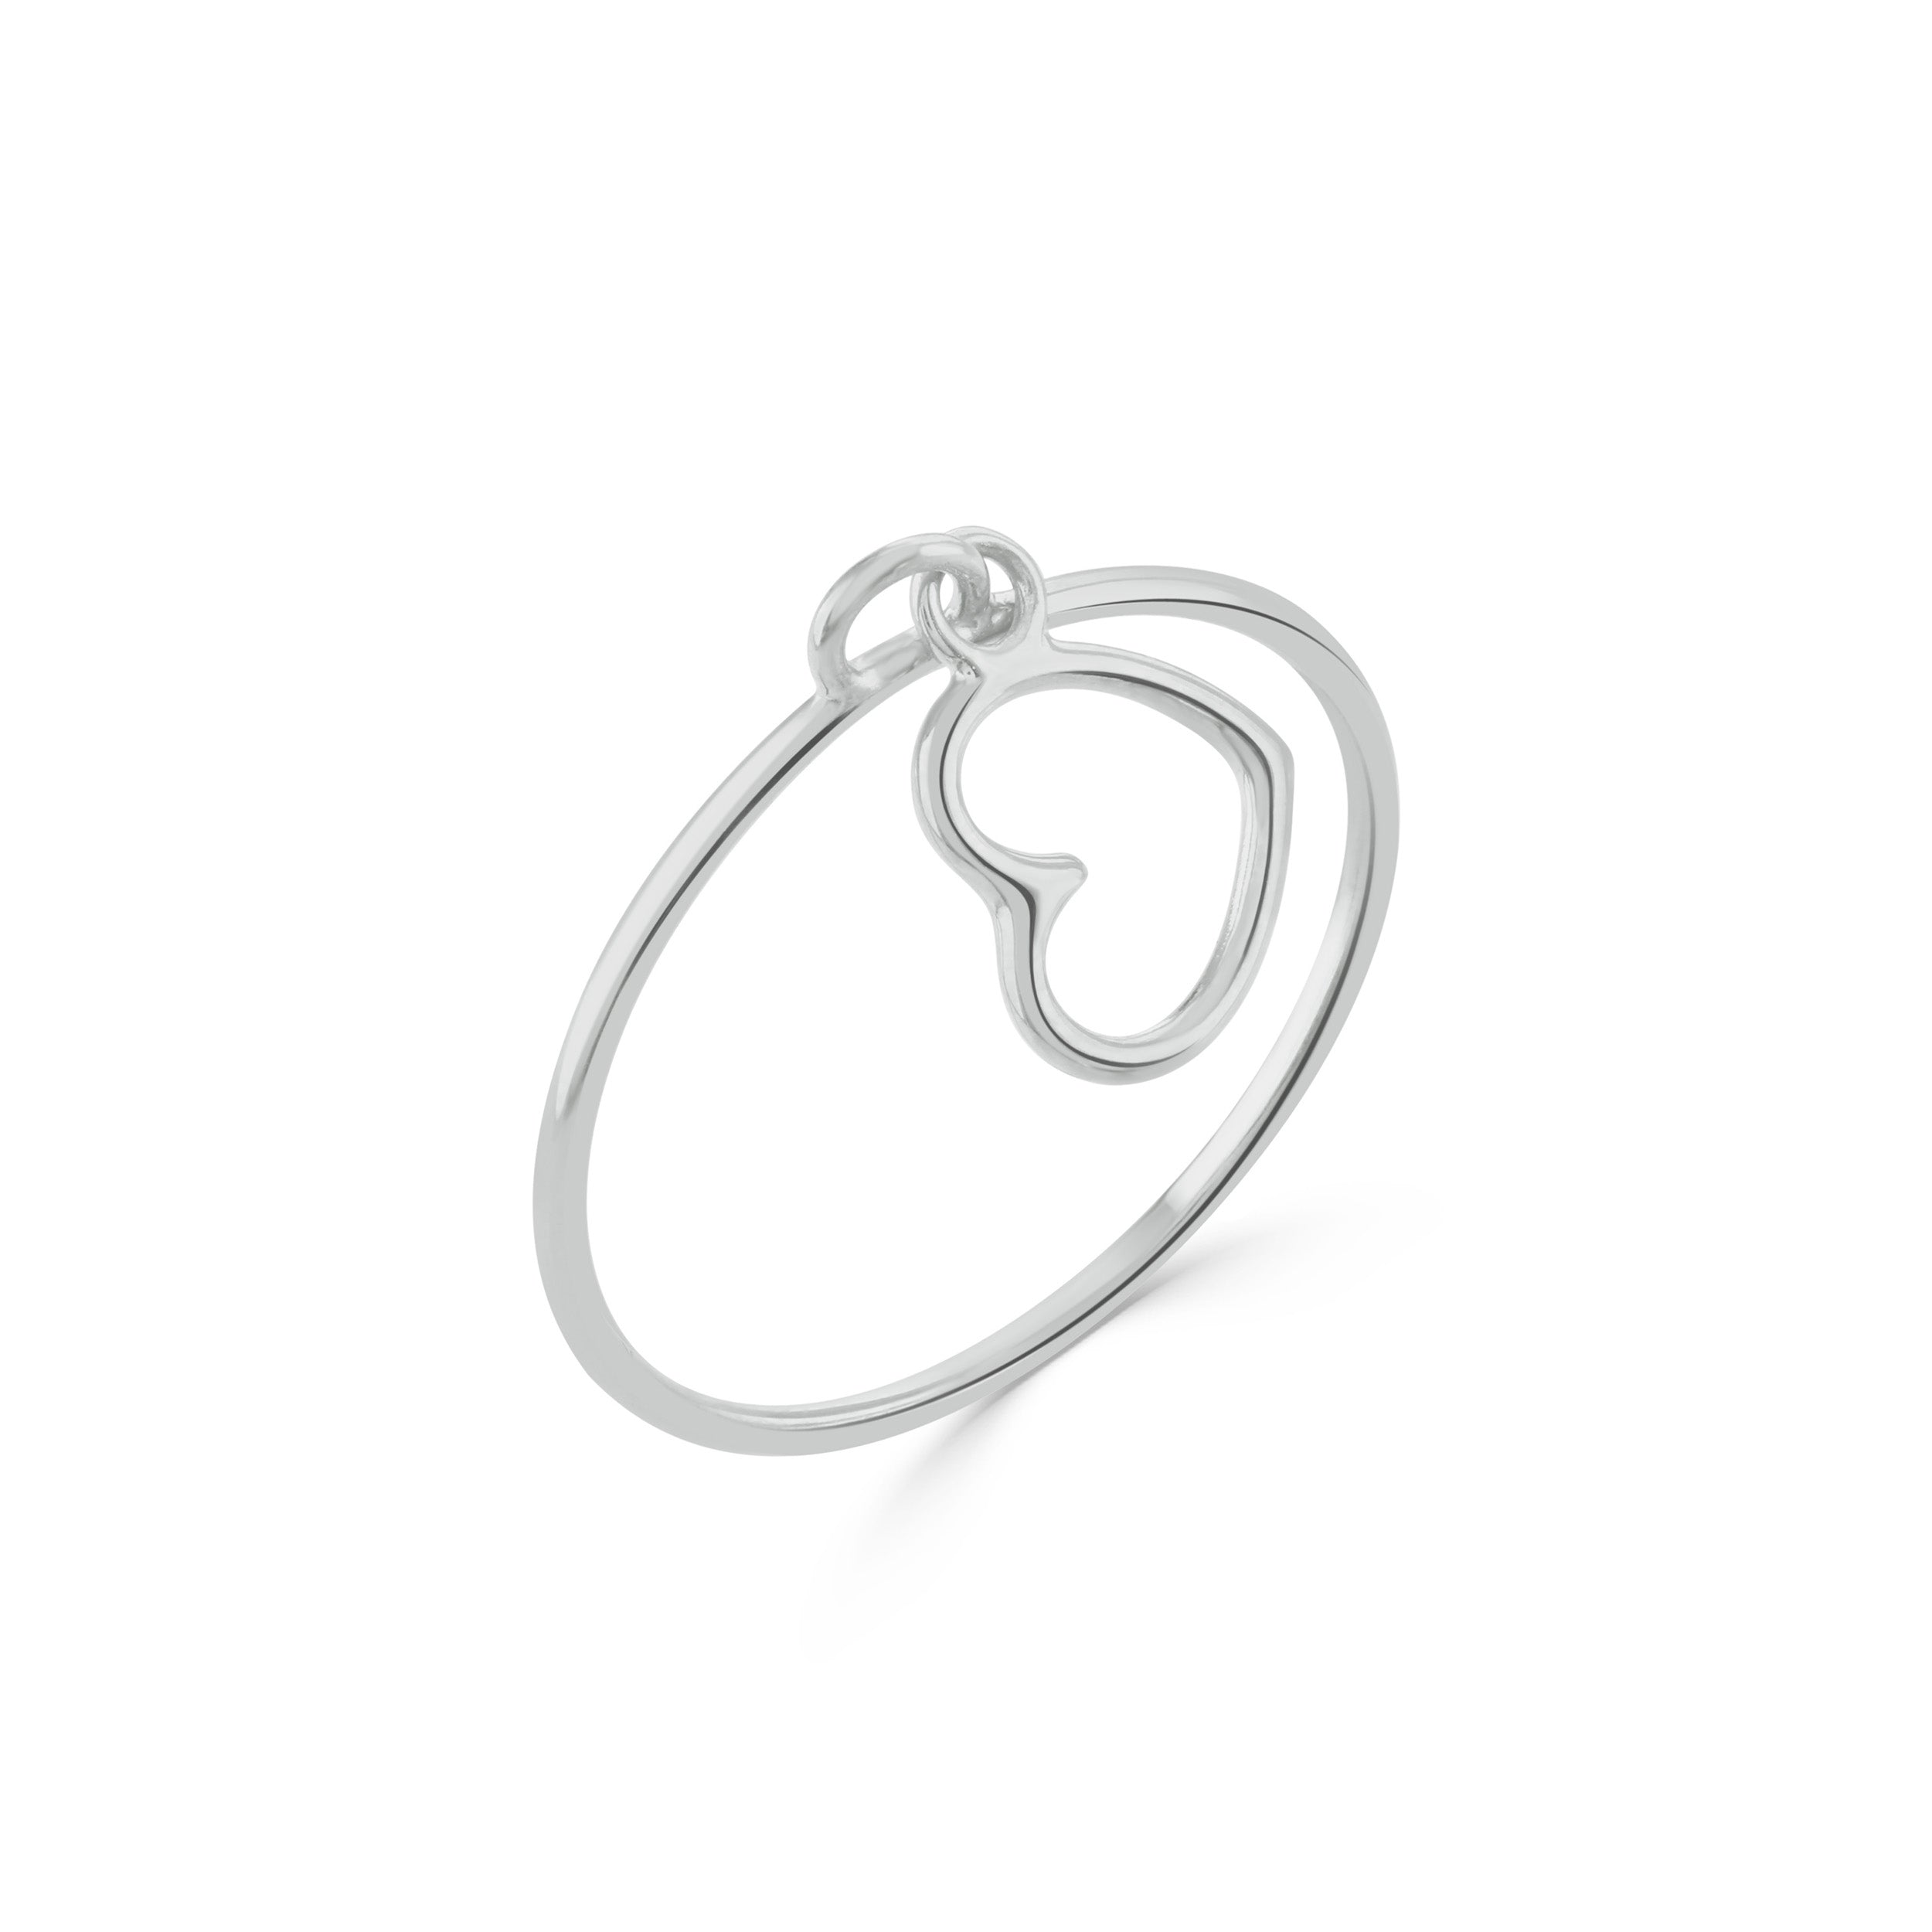 Silver Heart Charm Ring